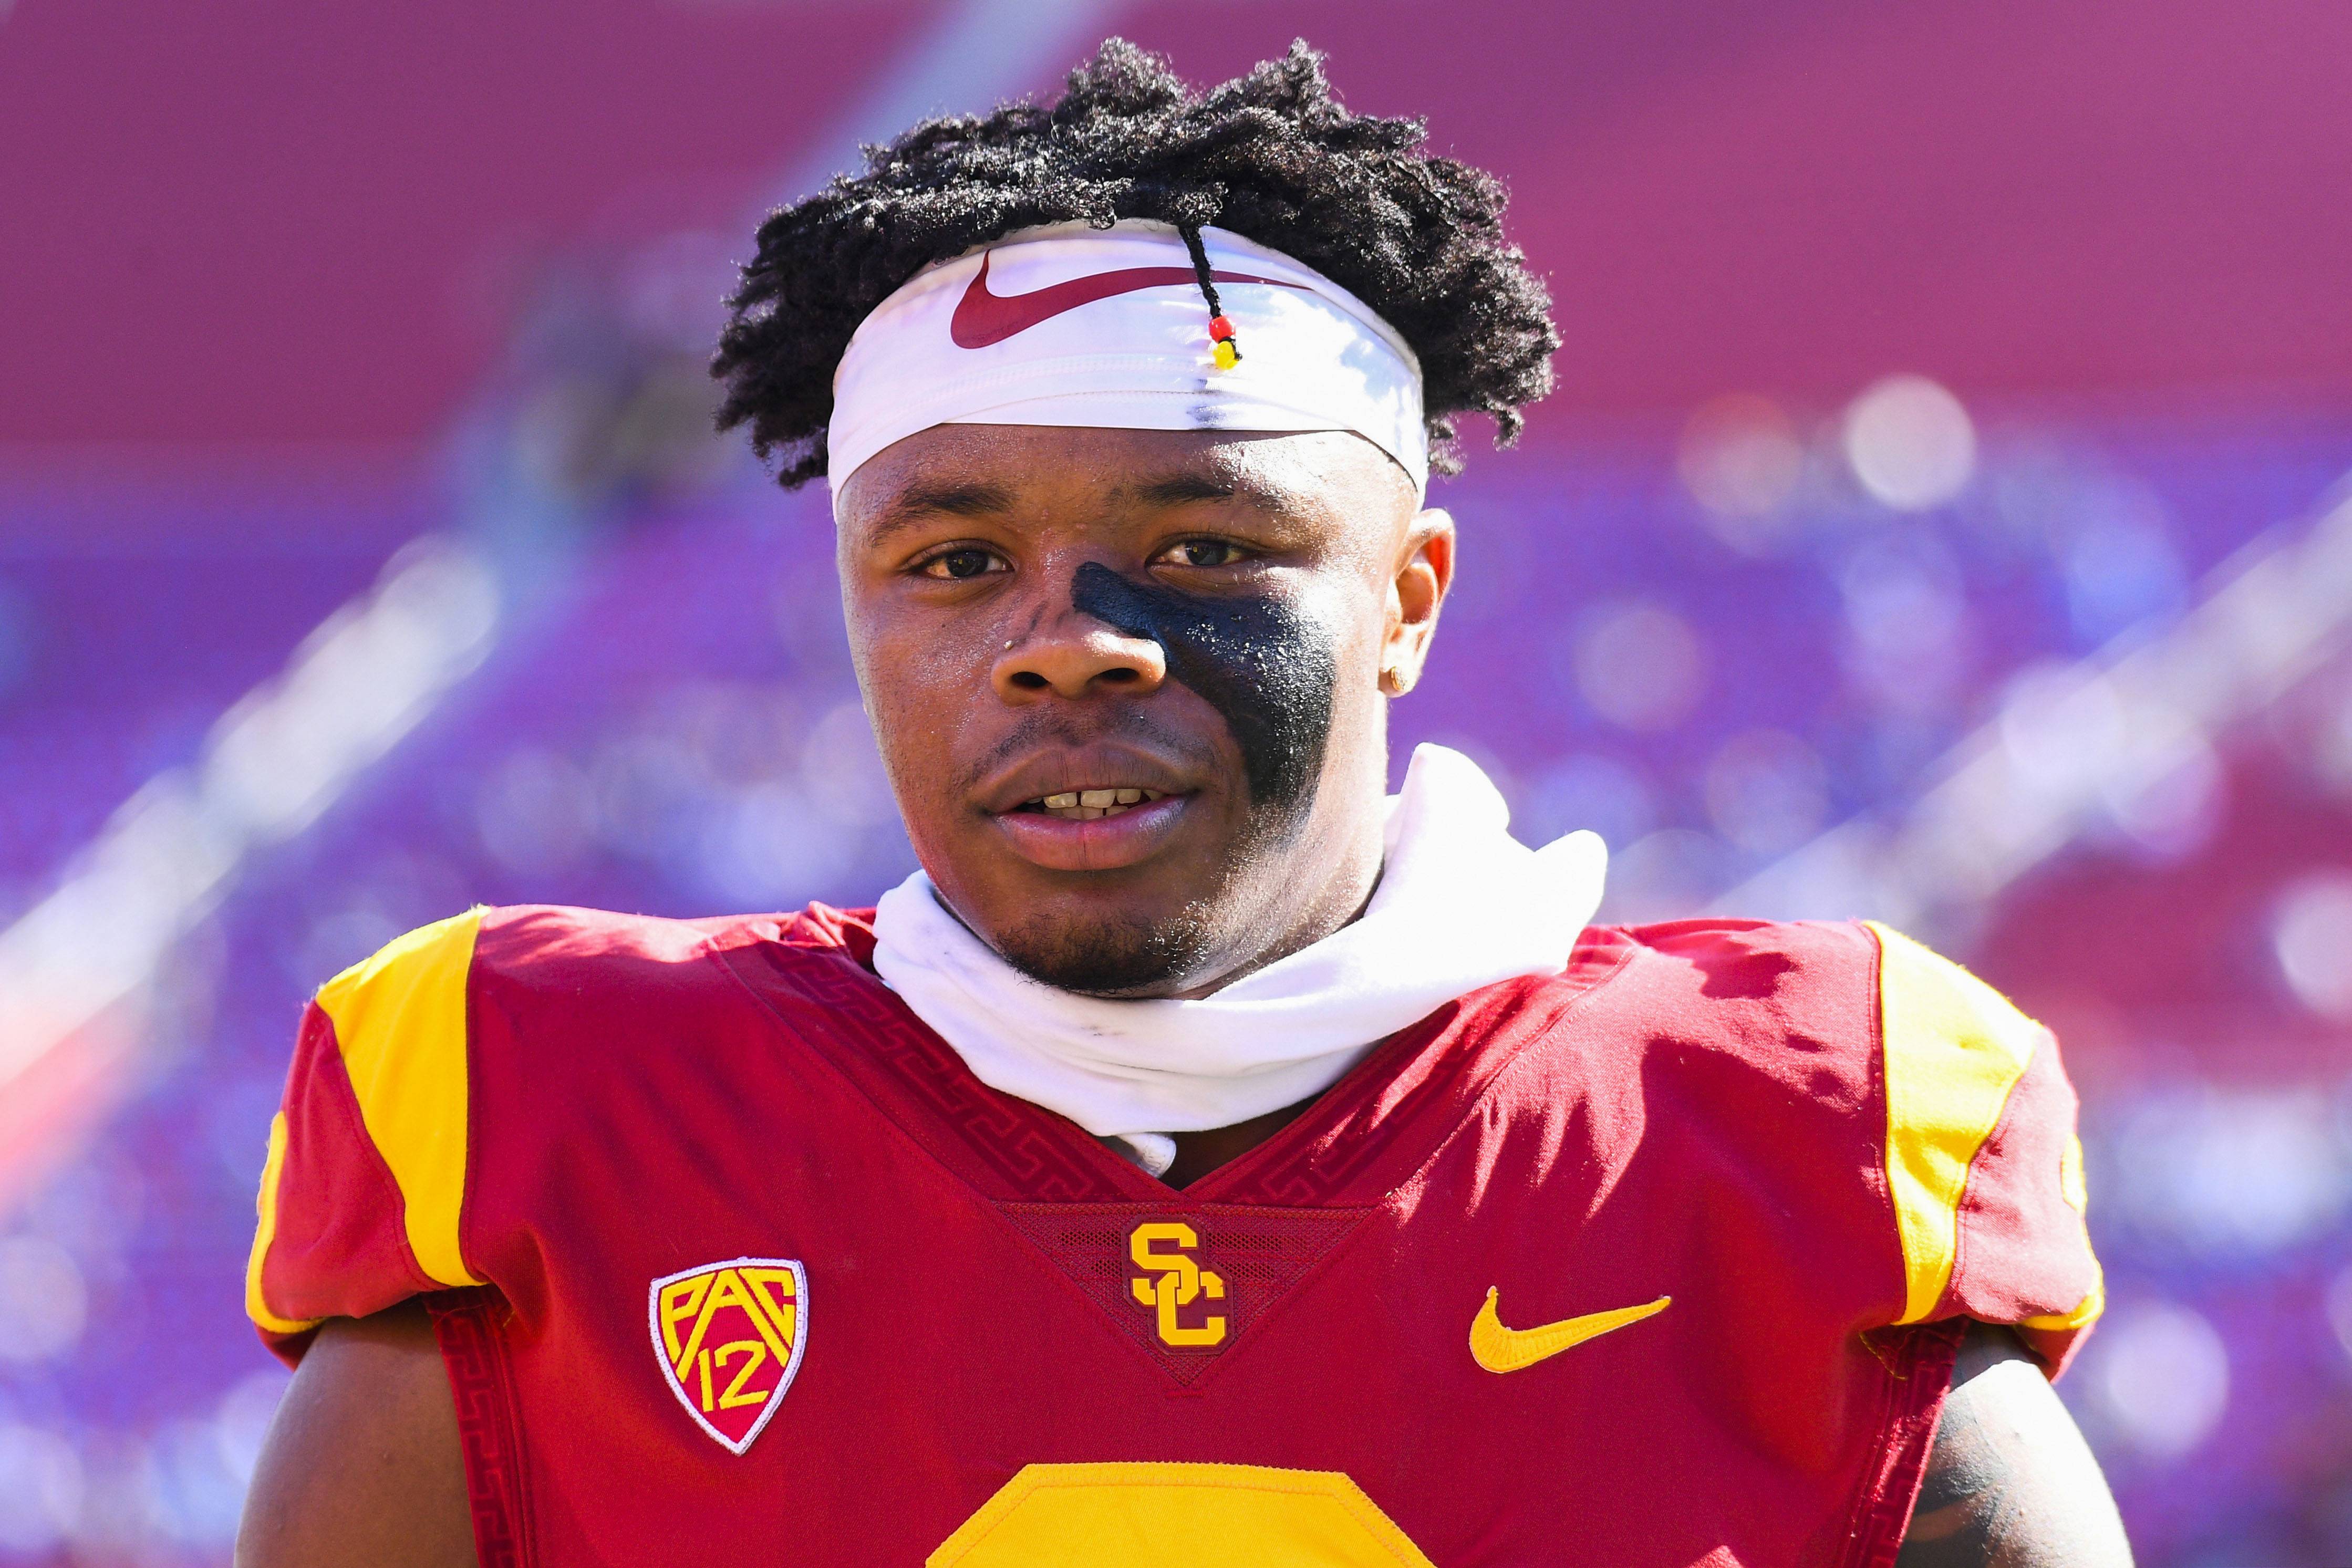 LOS ANGELES, CA - NOVEMBER 23: USC Trojans defensive back Olaijah Griffin (2) looks on before a college football game between the UCLA Bruins and the USC Trojans on November 23, 2019, at Los Angeles Memorial Coliseum in Los Angeles, CA. (Photo by Brian Rothmuller/Icon Sportswire via Getty Images)